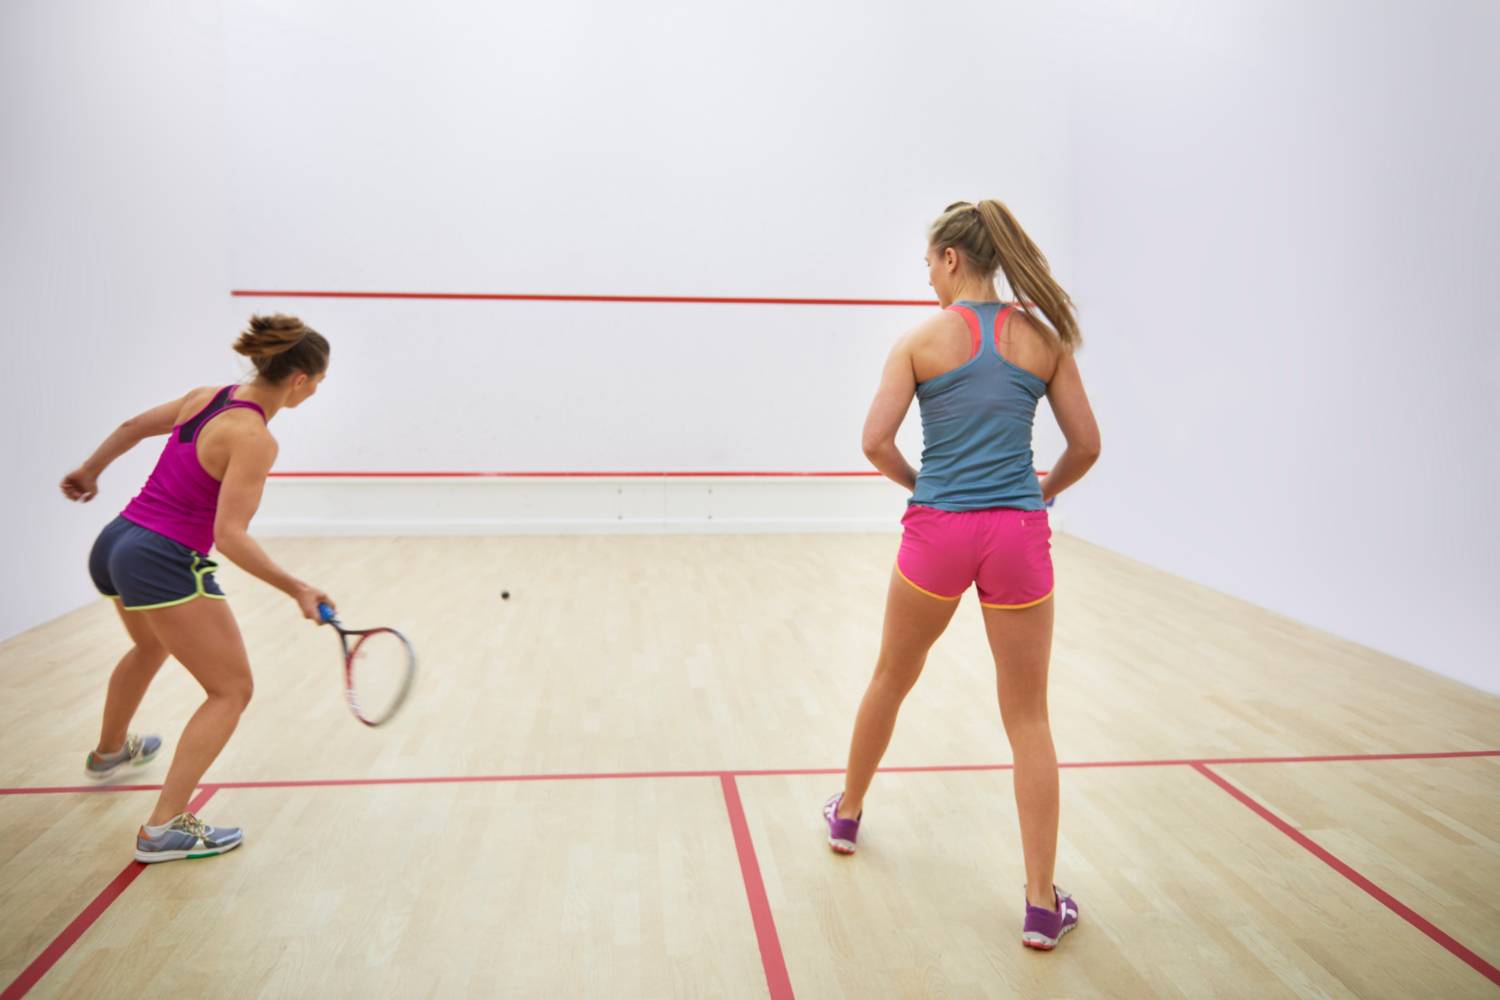 squash players on court